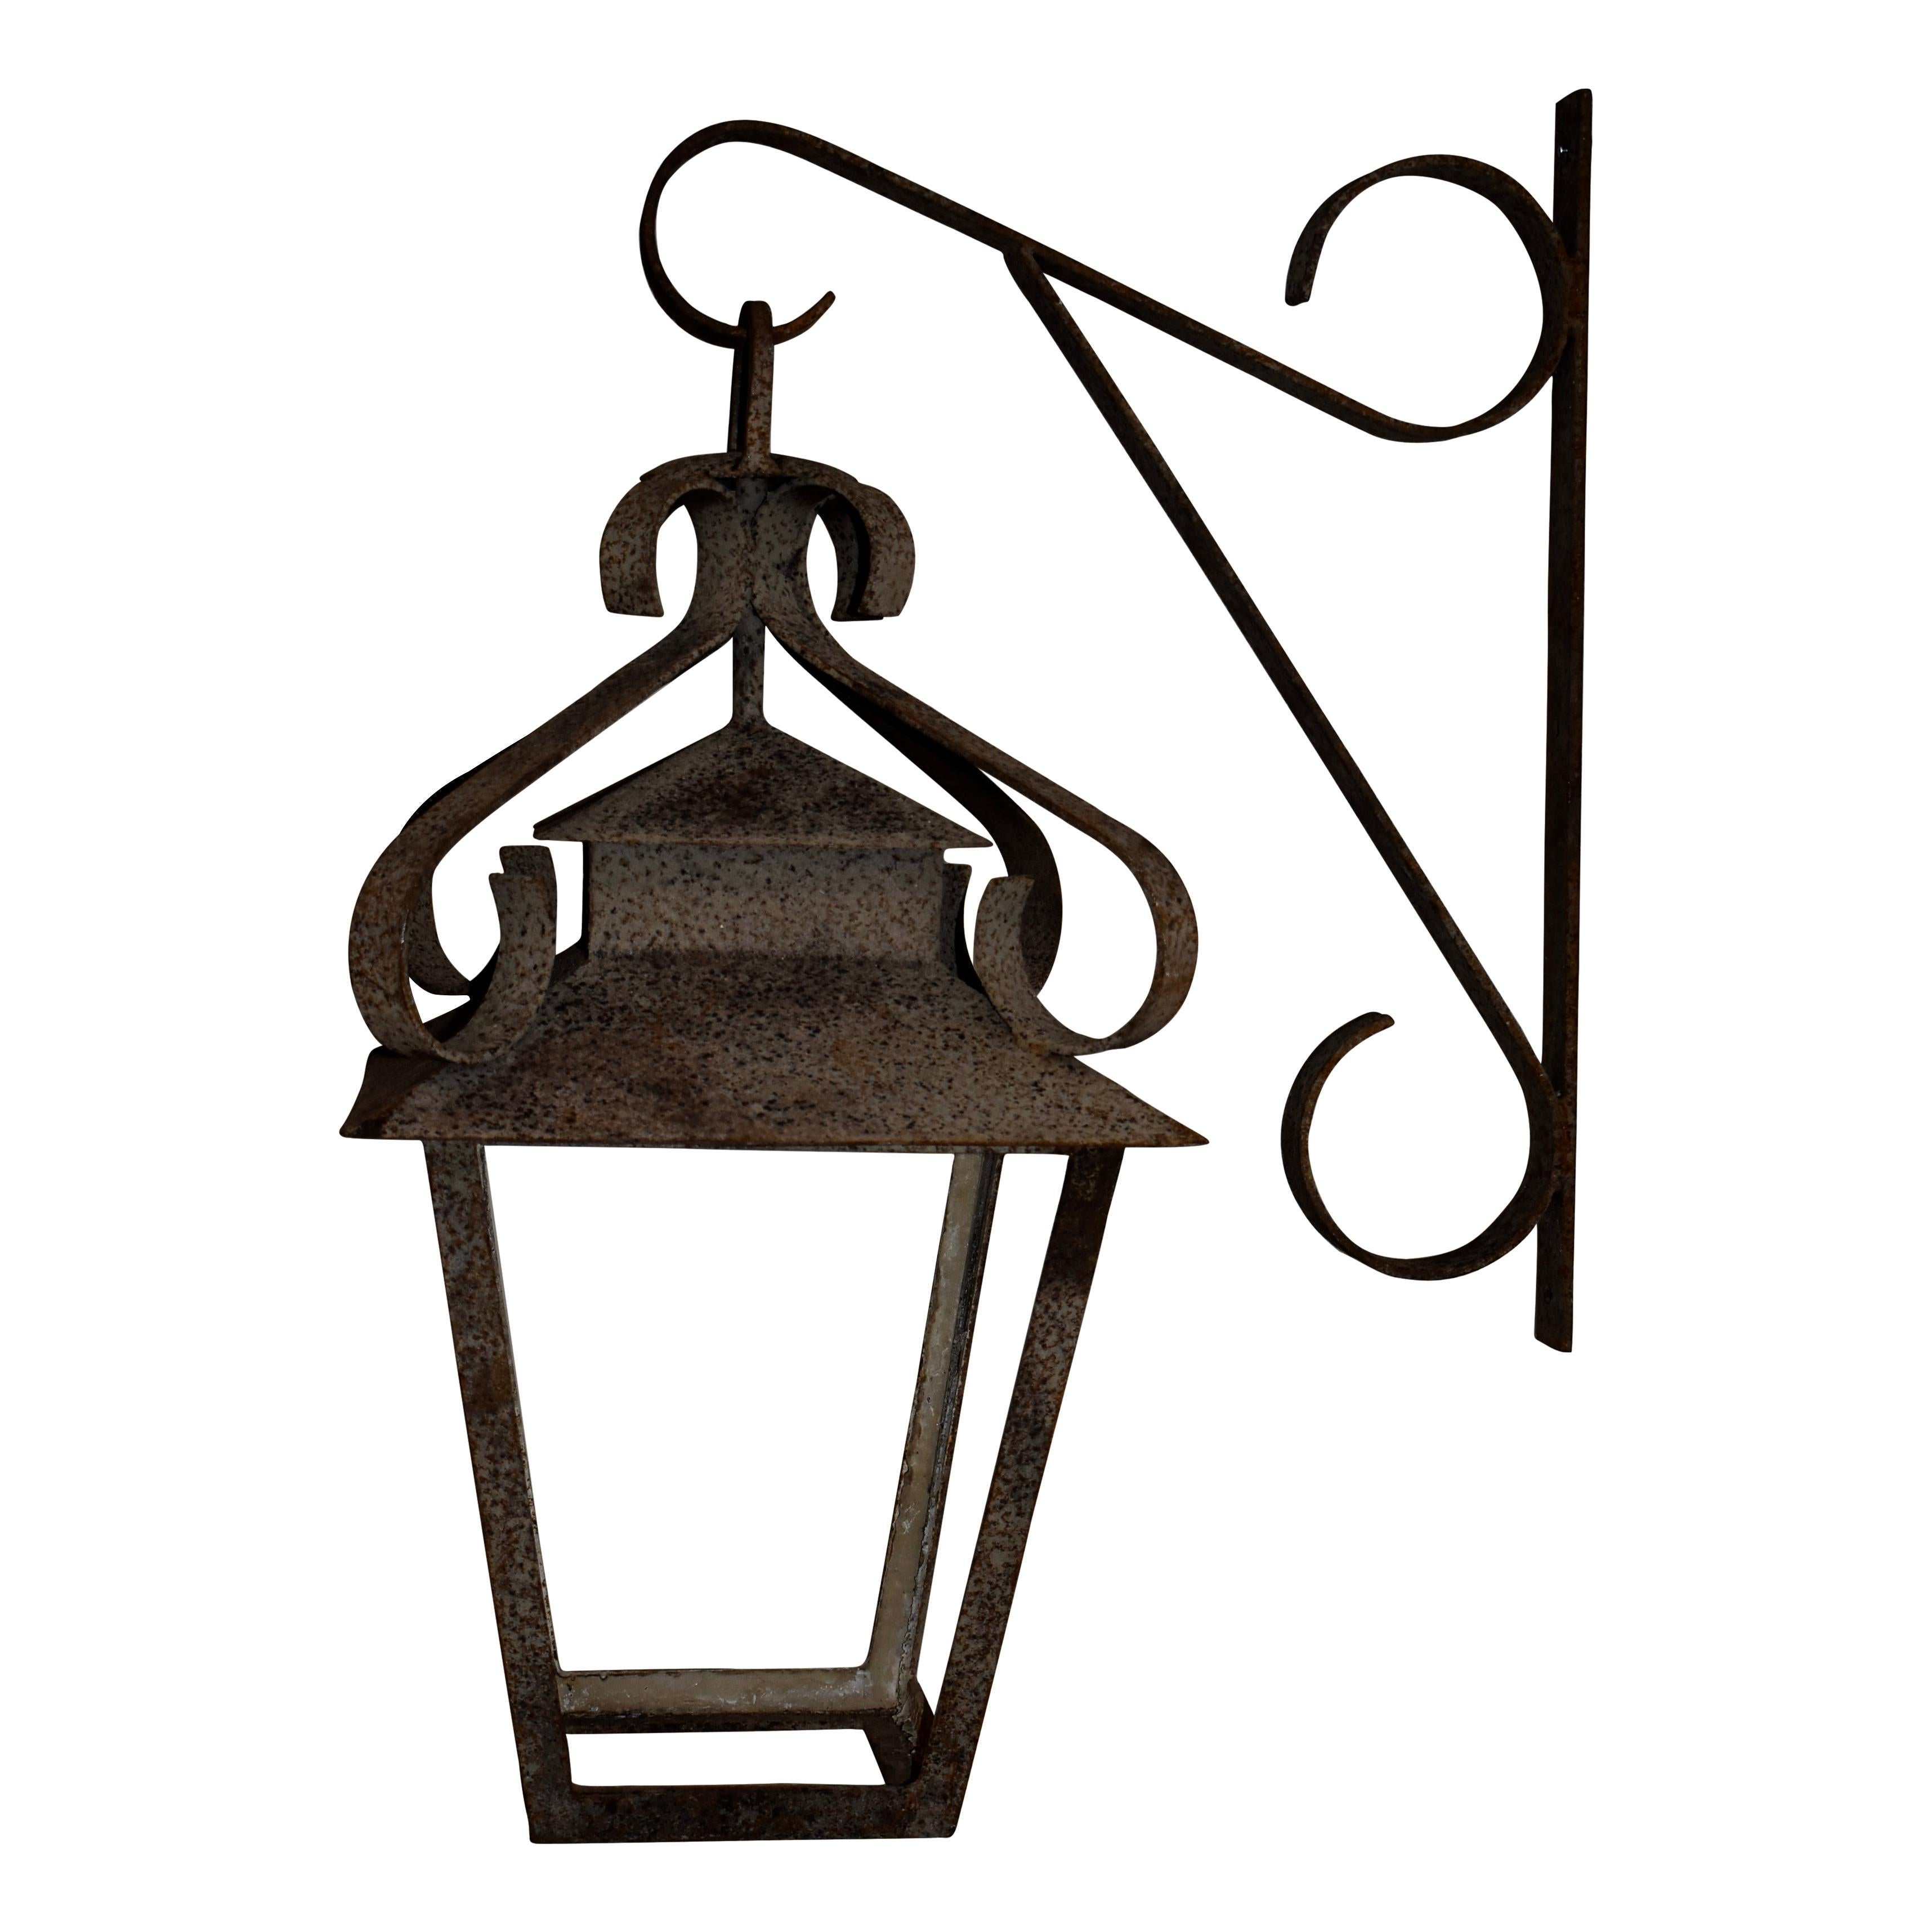 Suspended from a scrolled bracket, this wrought iron lantern features four tapered sides beneath a covered roof. Additional scrollwork over the roof adds simple elegance. No wiring. No glass.

Dimensions of lantern: 16.75